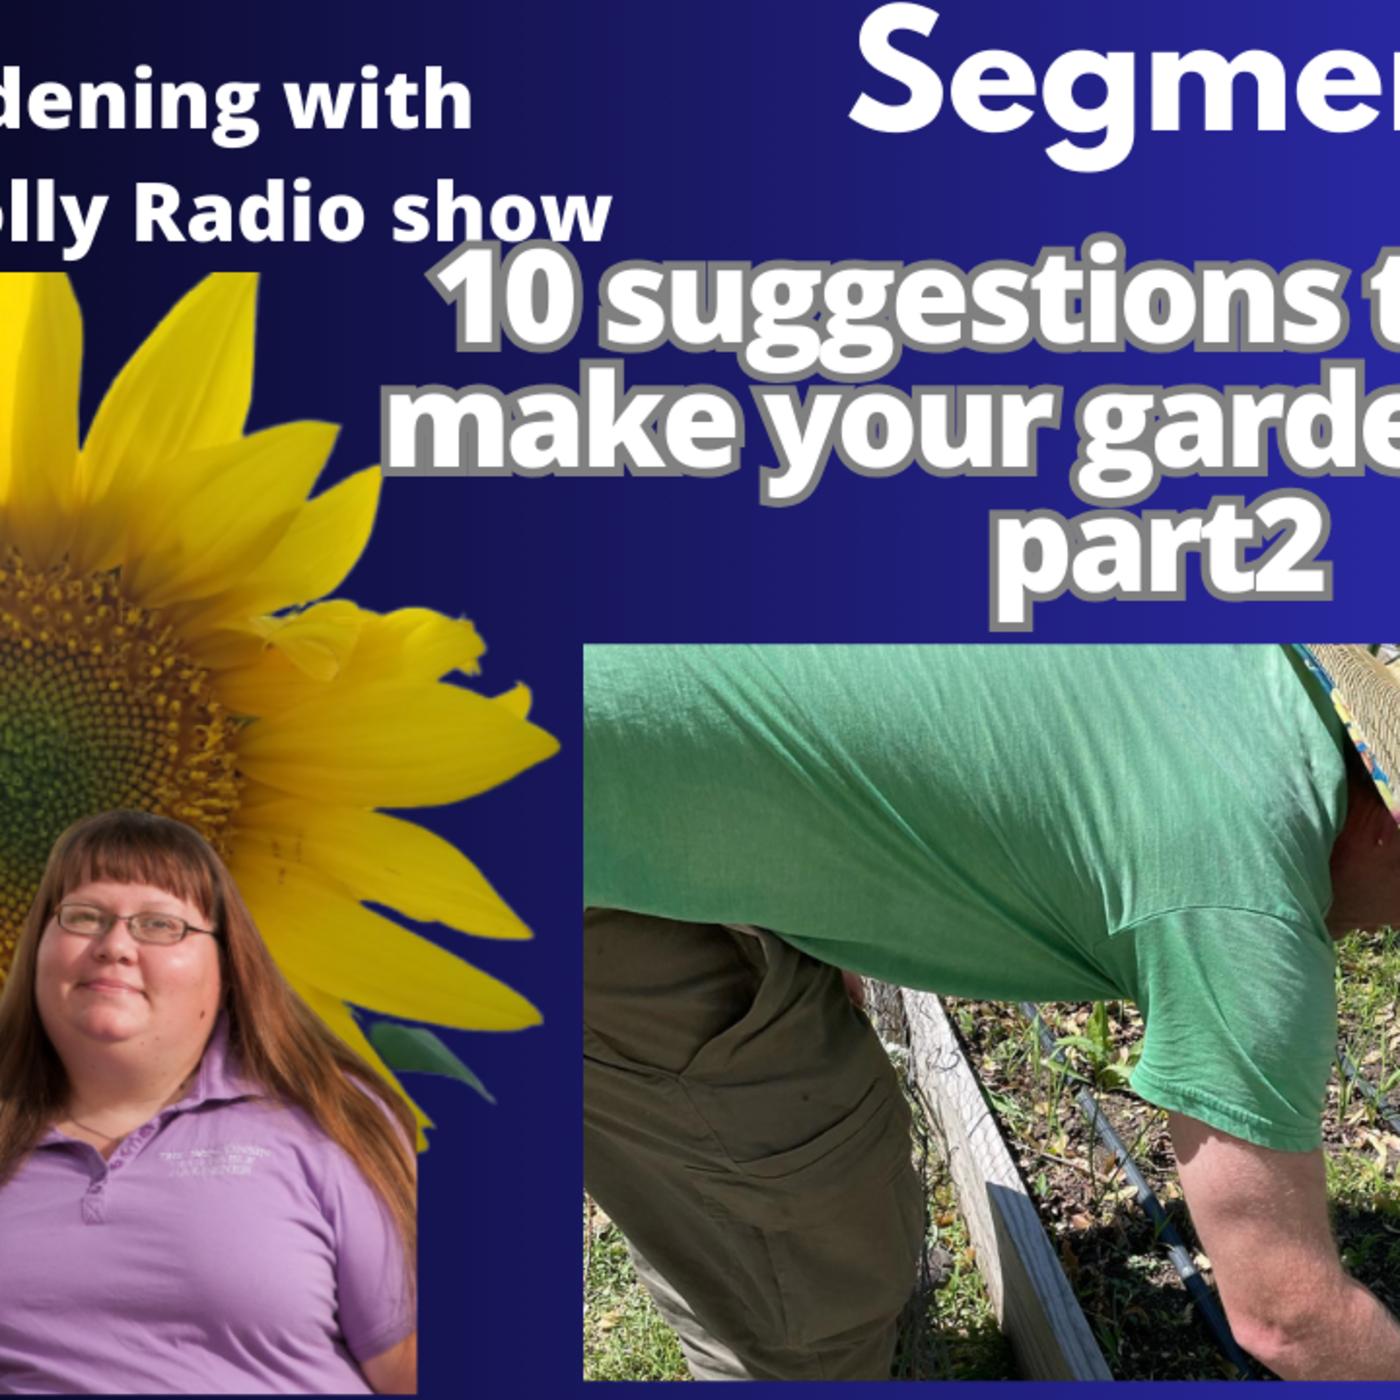 Episode 1182: Seg 2 of S8E Part 2 of  10 suggestions that will make your garden better - The Gardening  radio Show